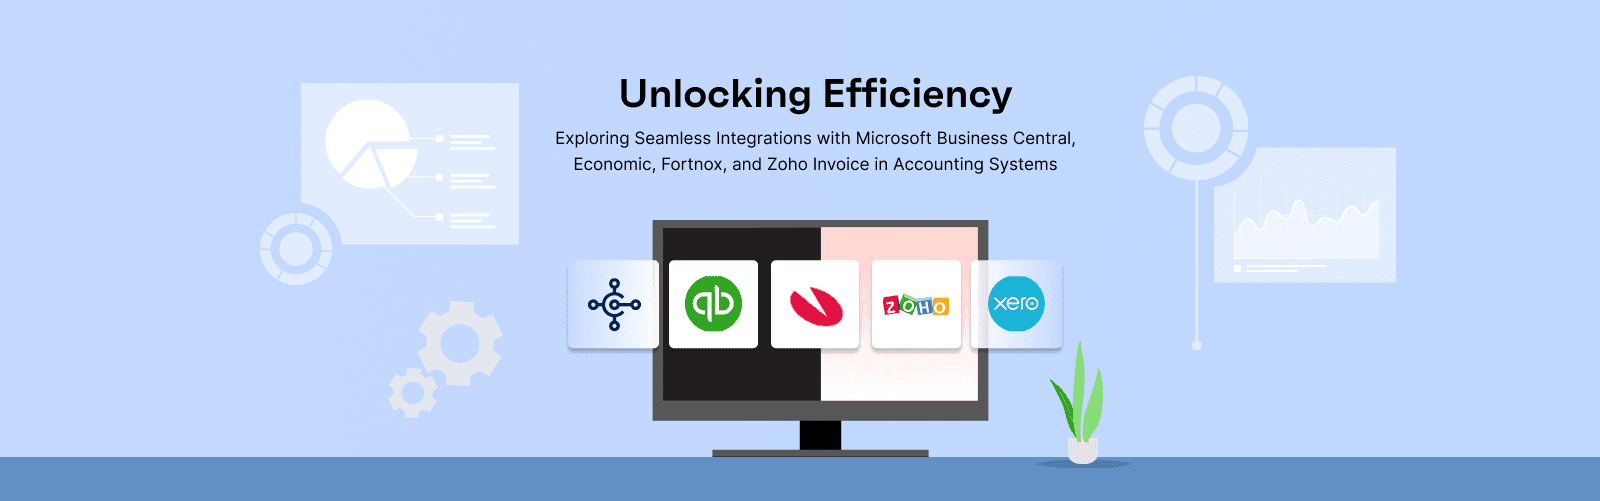 Unlocking Efficiency: Exploring Seamless Integrations with Microsoft Business Central, Economic, Fortnox, and Zoho Invoice in Accounting Systems